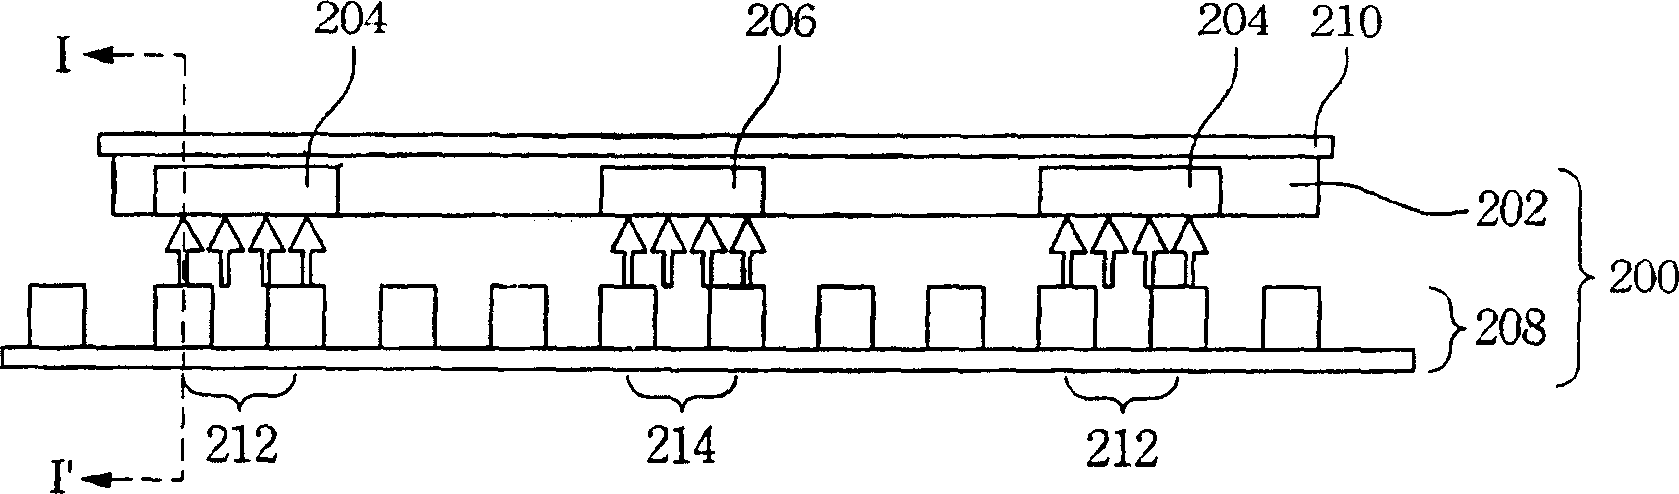 Substrate carrying device